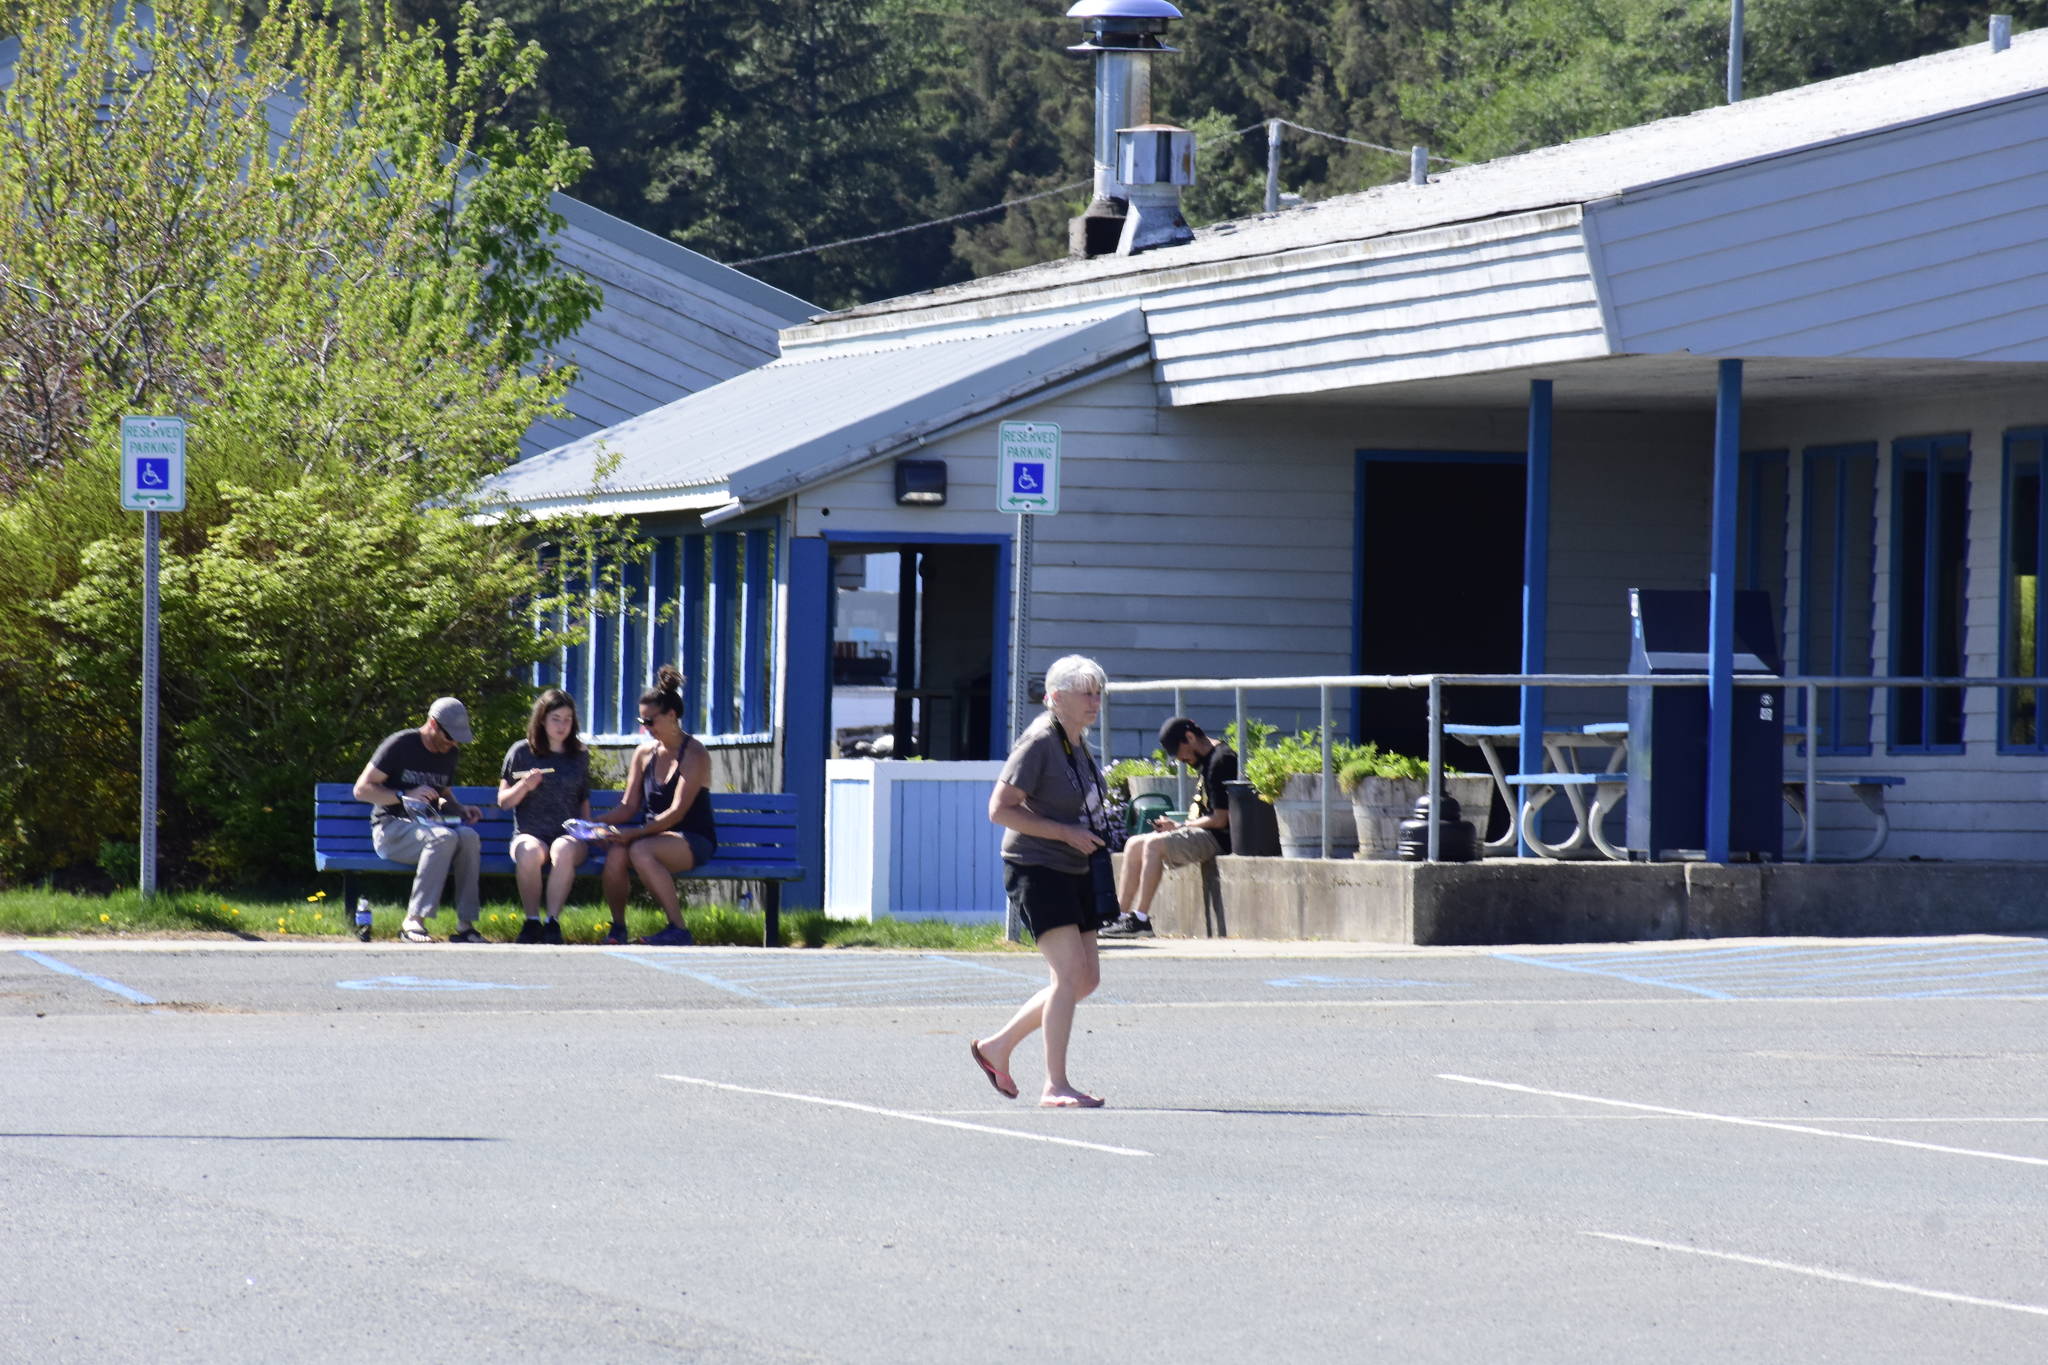 A bill from Gov. Mike Dunleavy would rework the Marine Transportation Advisory Board to help the Alaska Marine Highway System with long-term planning to provide better service for passengers like the ones seen here at the Auke Bay Ferry Terminal on May 16, 2020. (Peter Segall / Juneau Empire)